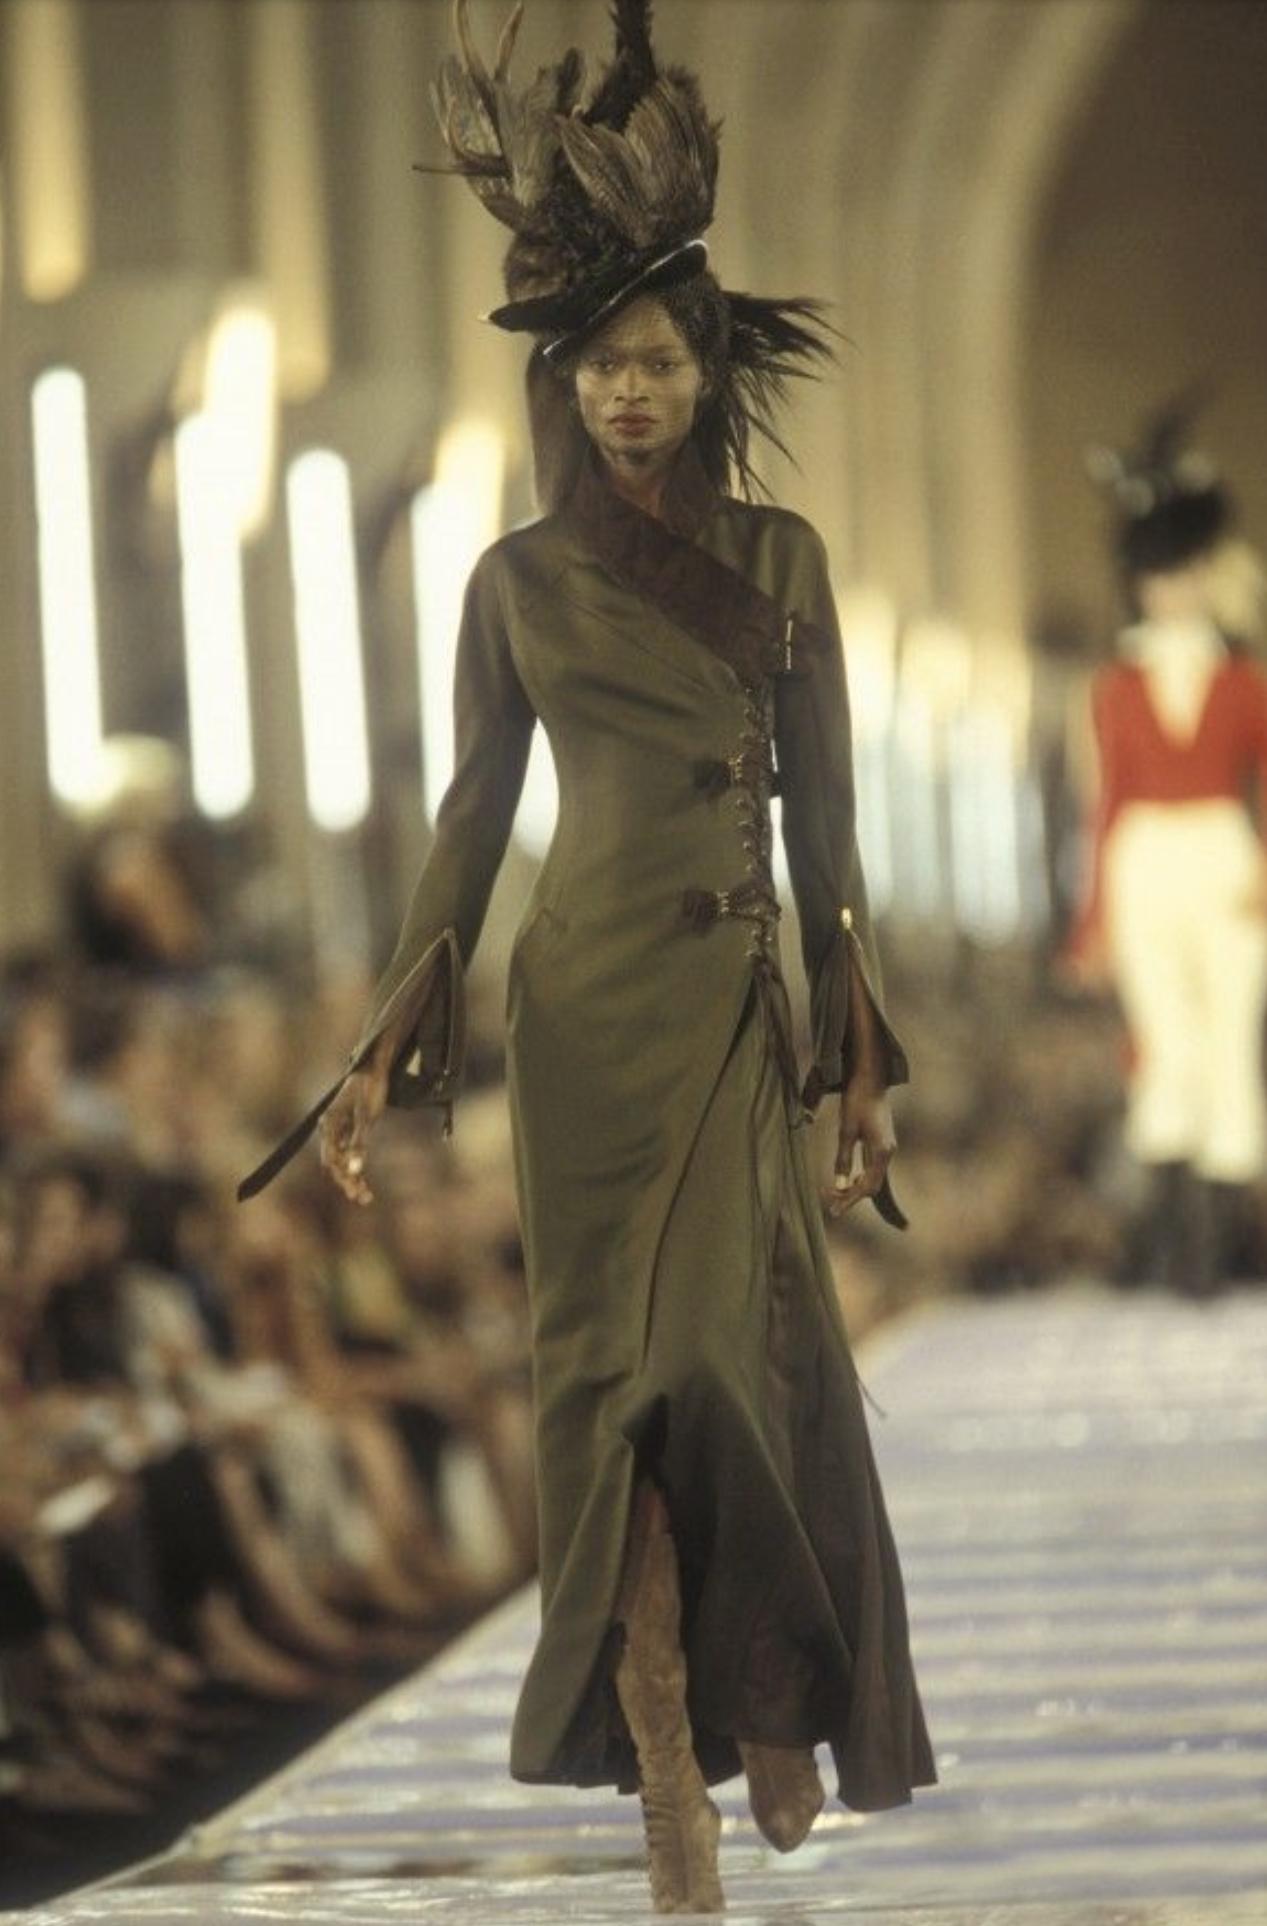 S/S 1999 Christian Dior by John Galliano olive green bias cut slip gown. Sleeveless spaghetti strap v-neck slip dress with high slit. Fabric Contents: 56% Viscose and 44% Acetate blend (feels like heavy textured silk satin material) with 100% Silk